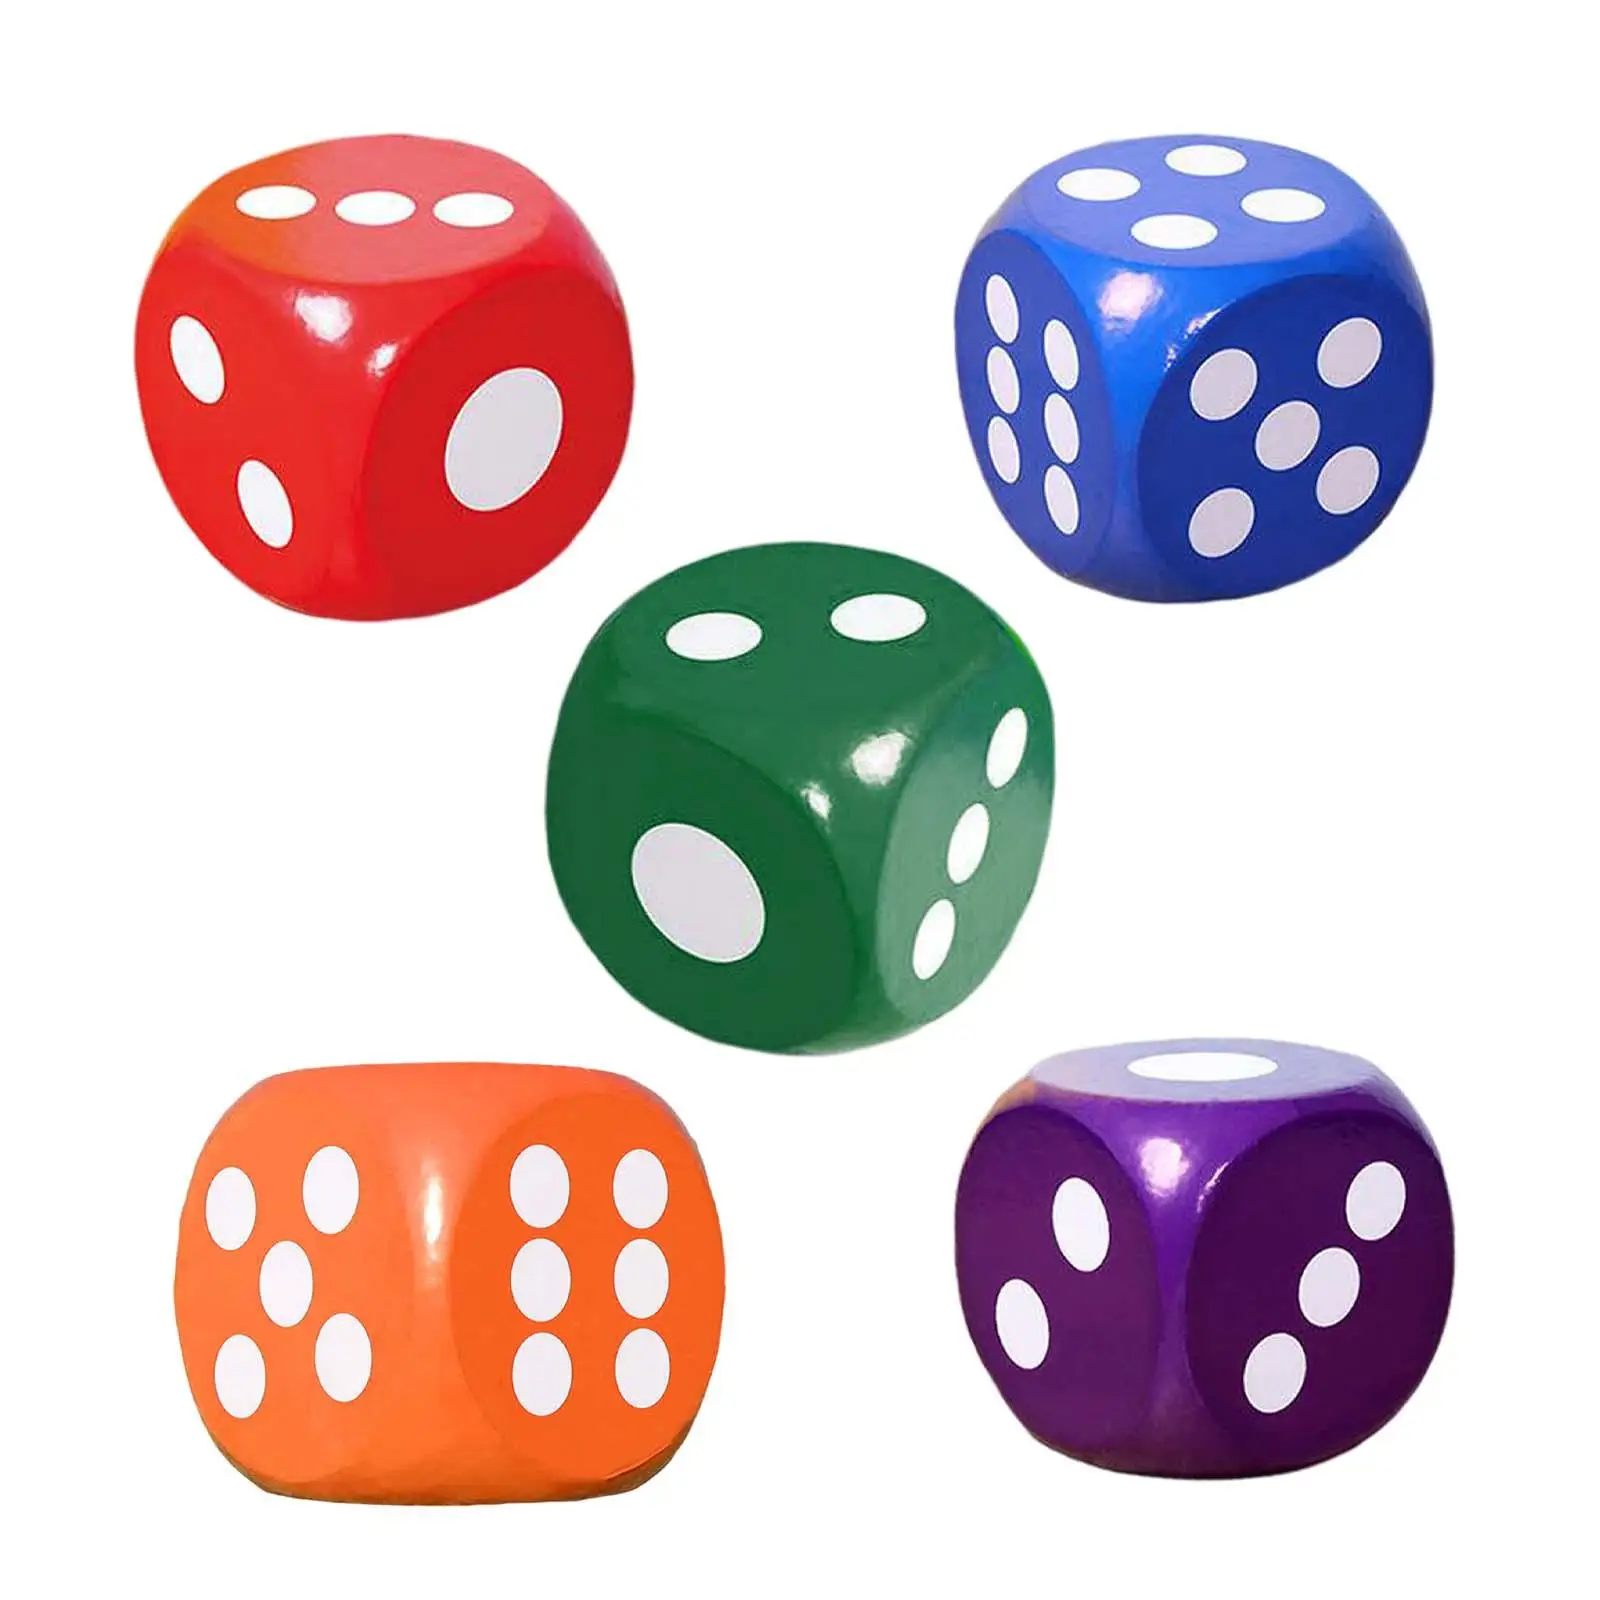 20cm Large Foam Dice 6 Sided Dot Dice Soft Foam Dice Early Math Skills for Kid Educational Toys Carnival School Supplies